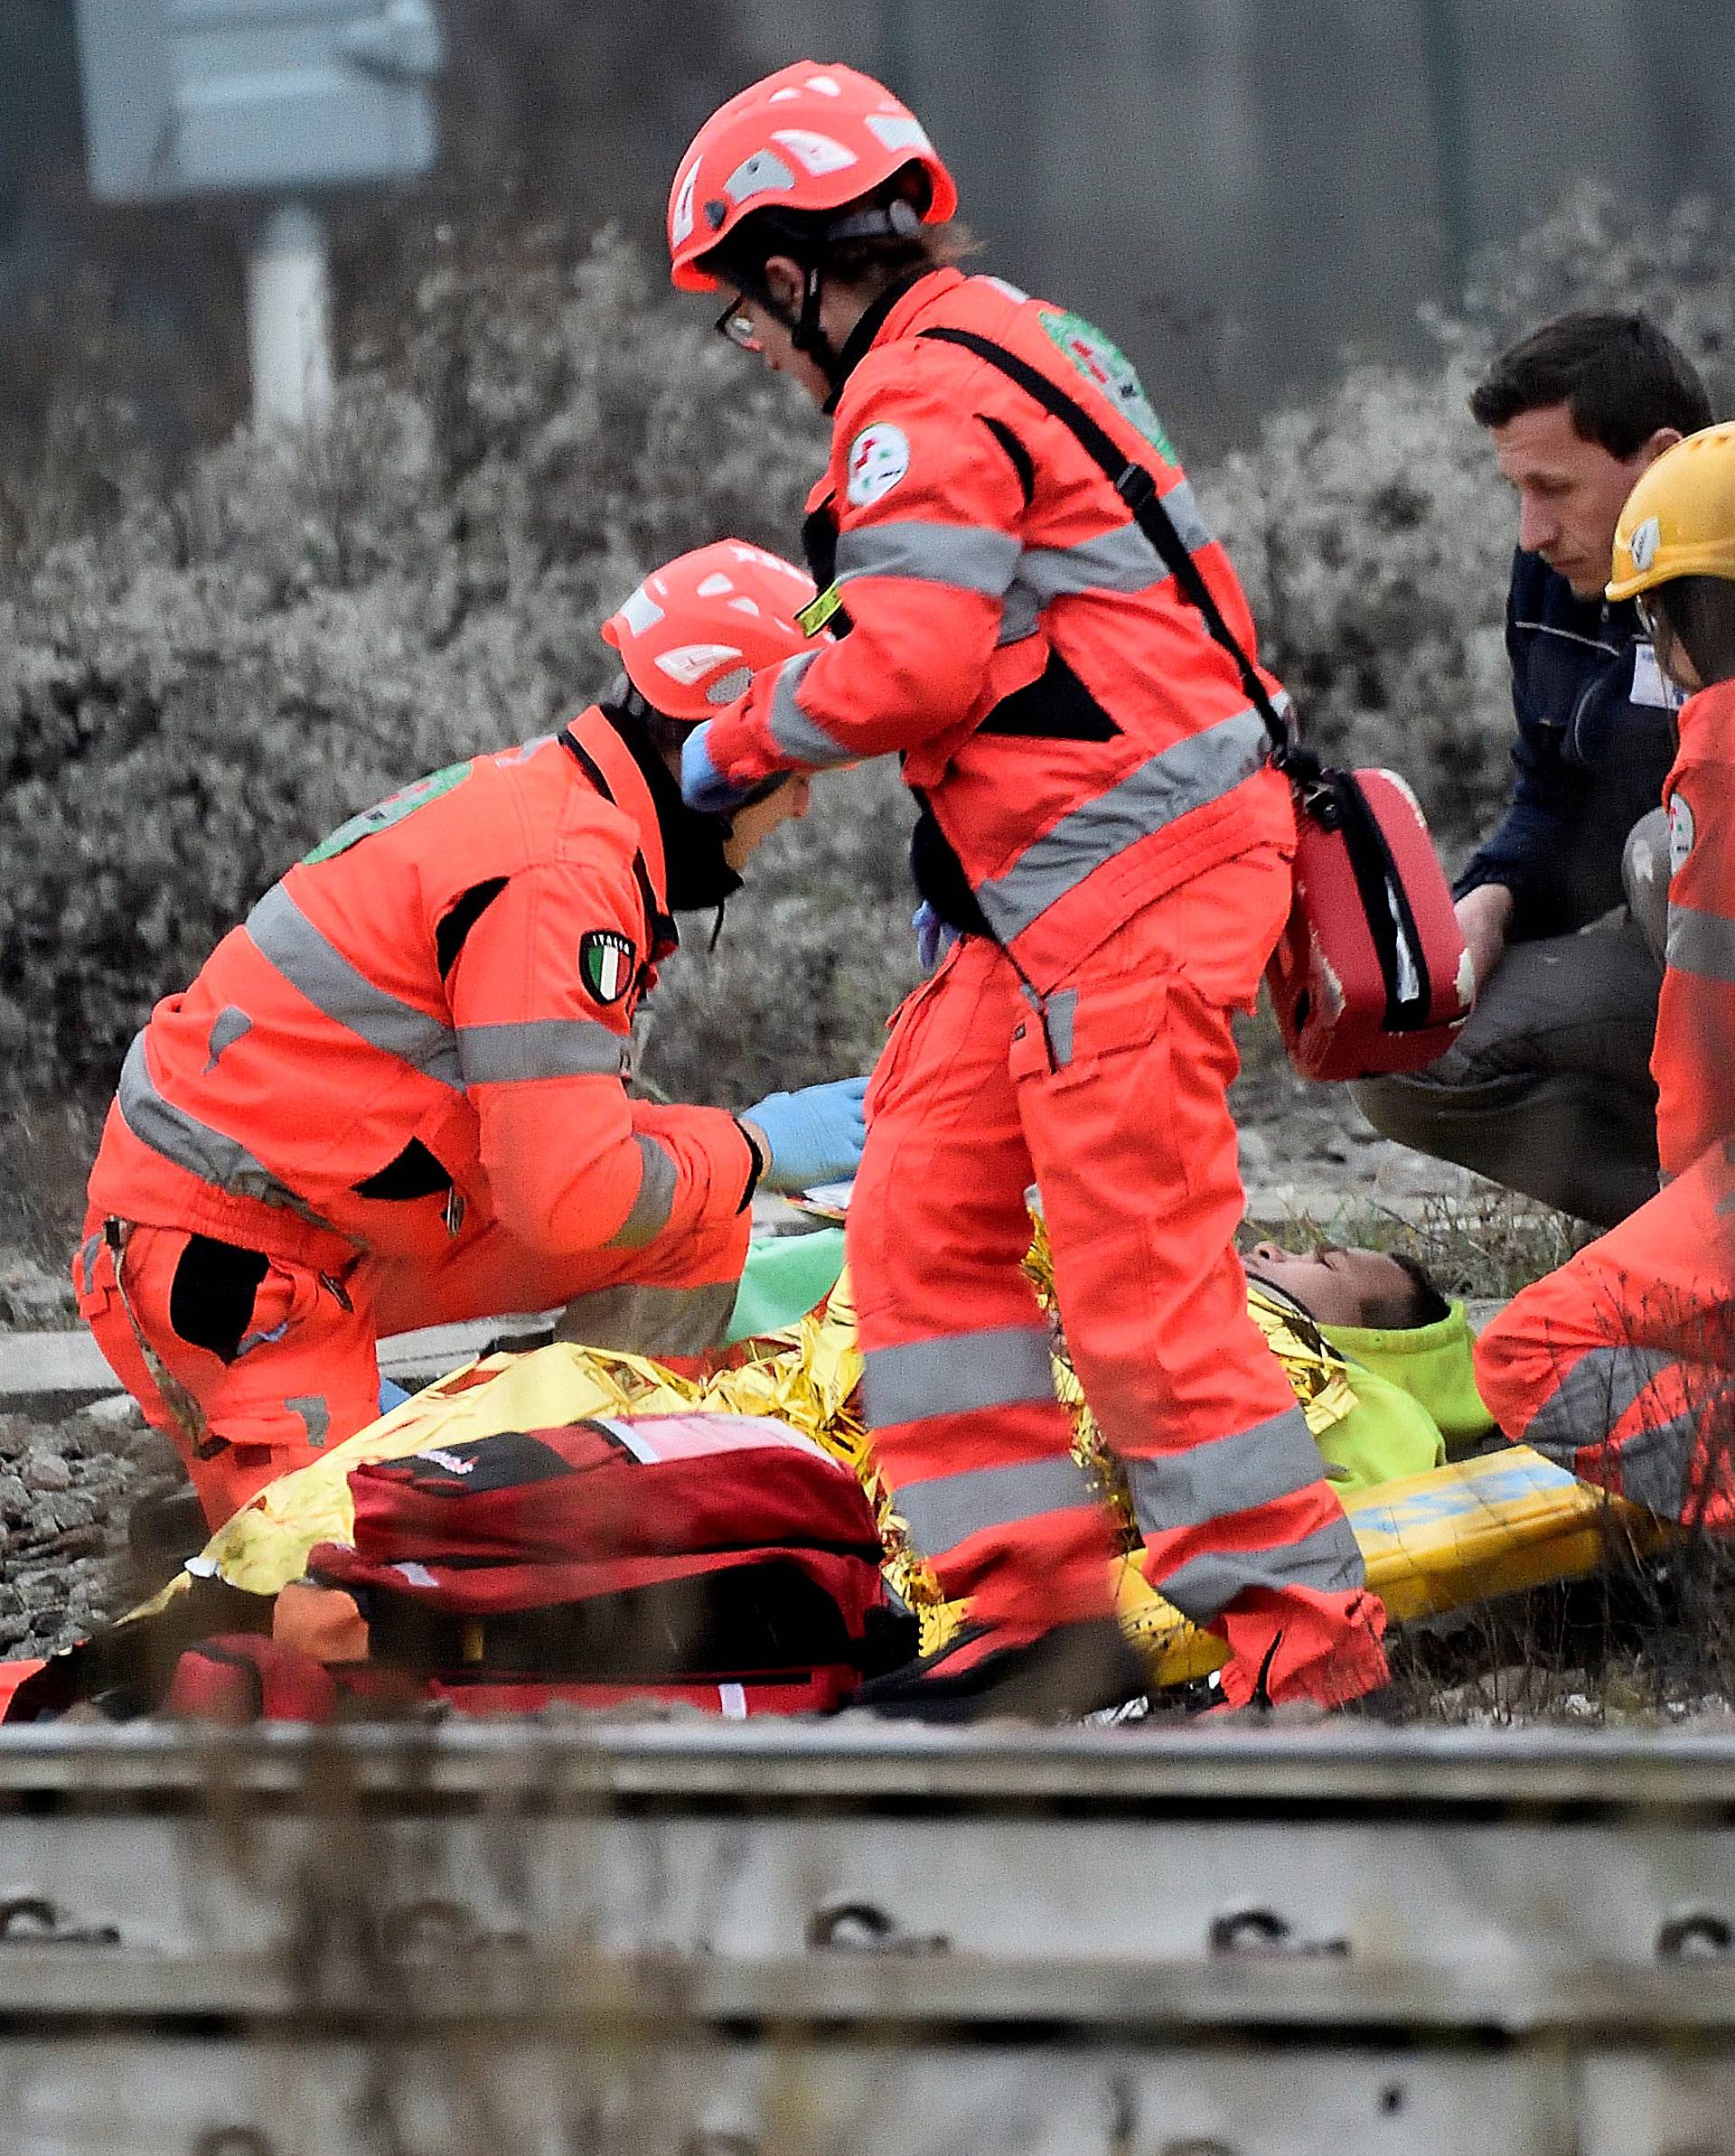 Rescue workers help an injured person on a stretcher after two trains derailed in Pioltello, on the outskirts of Milan